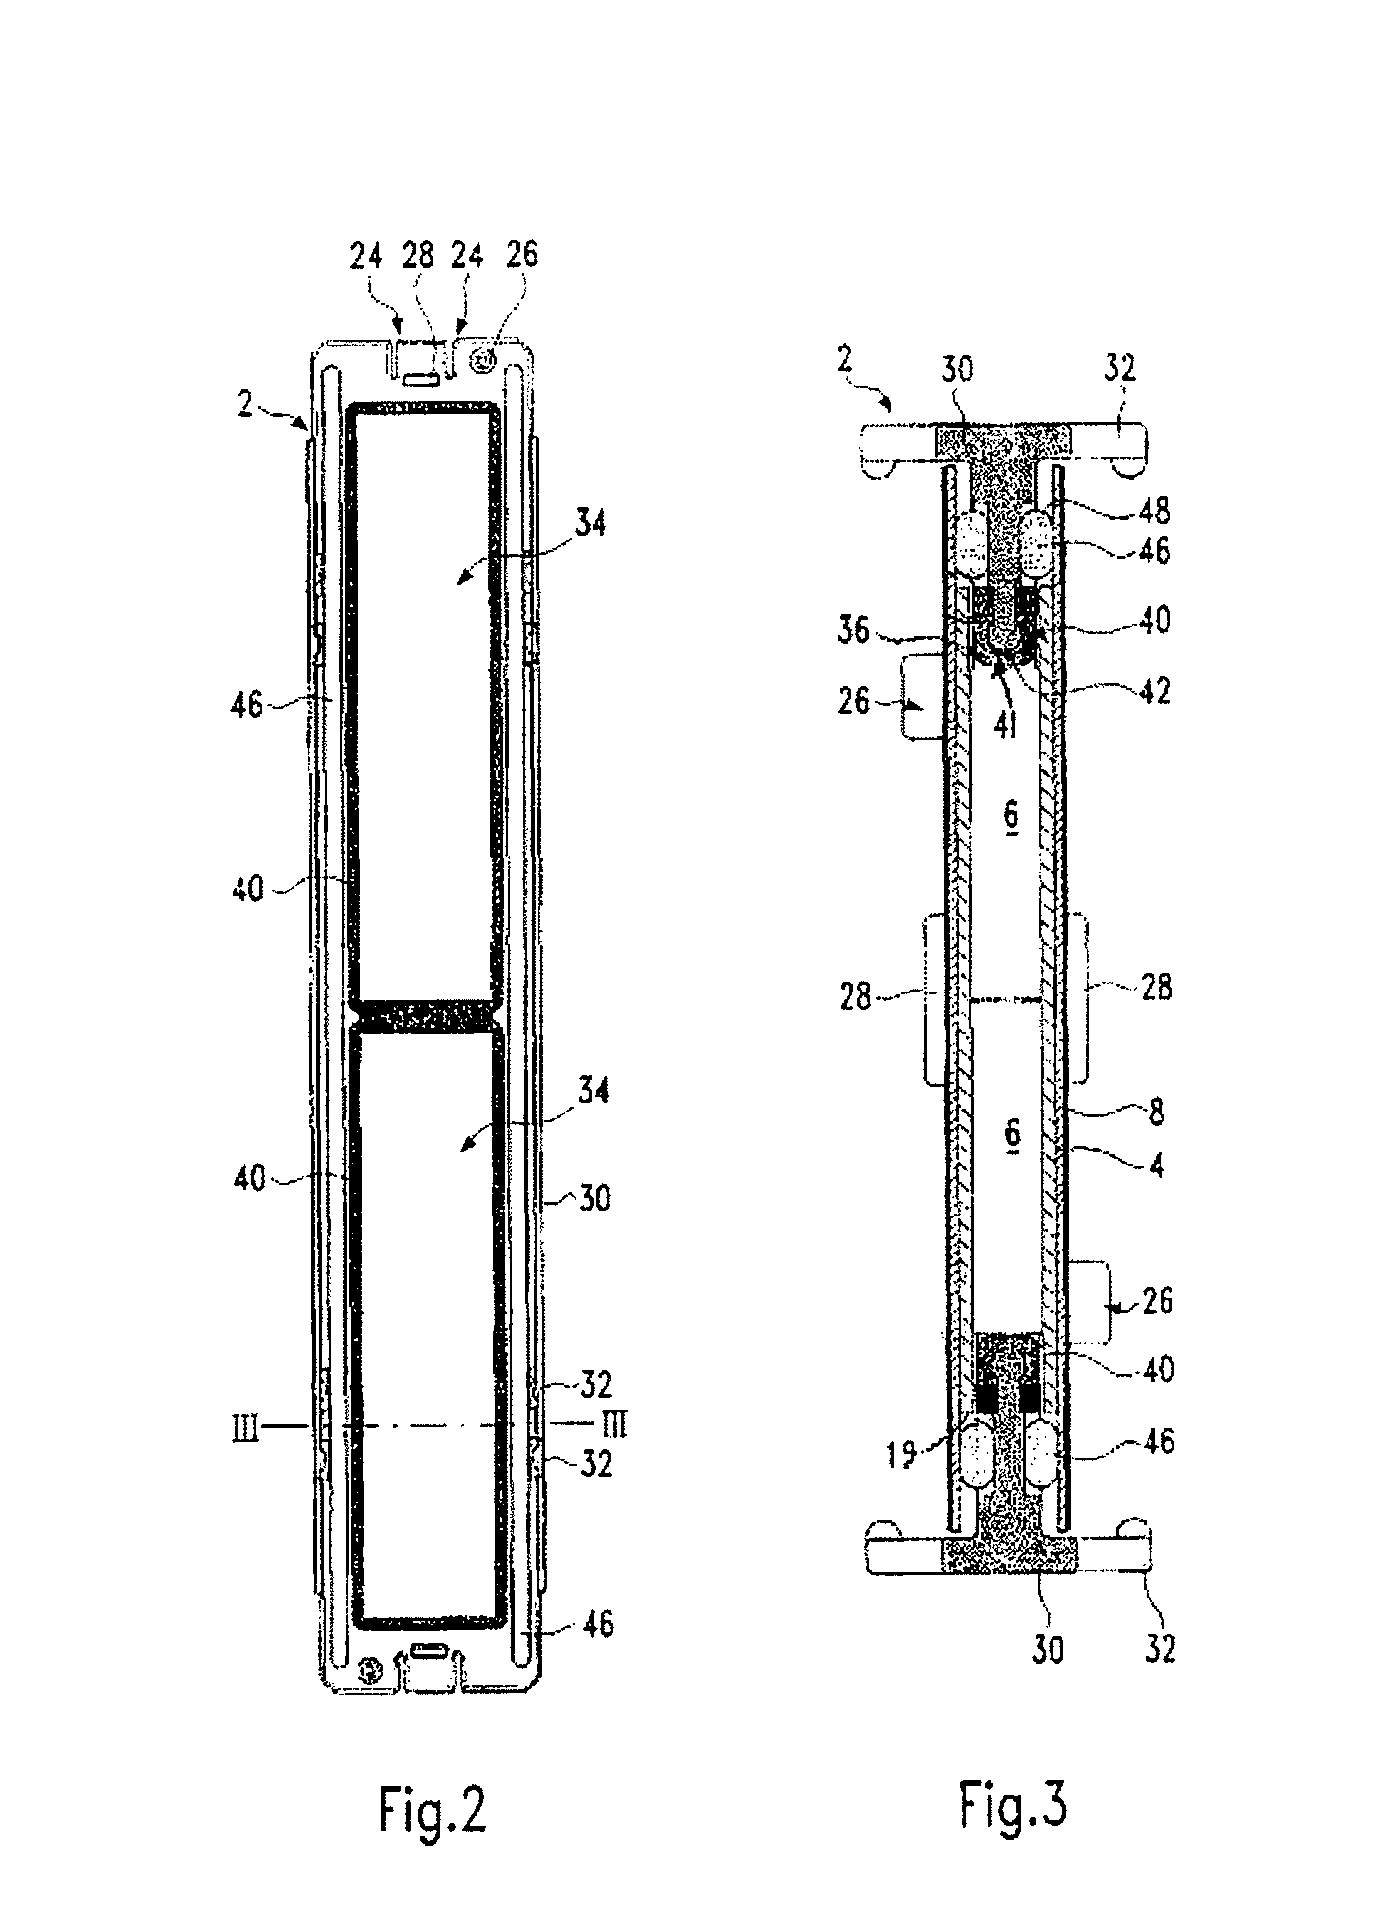 Heat-generating element of a heating device